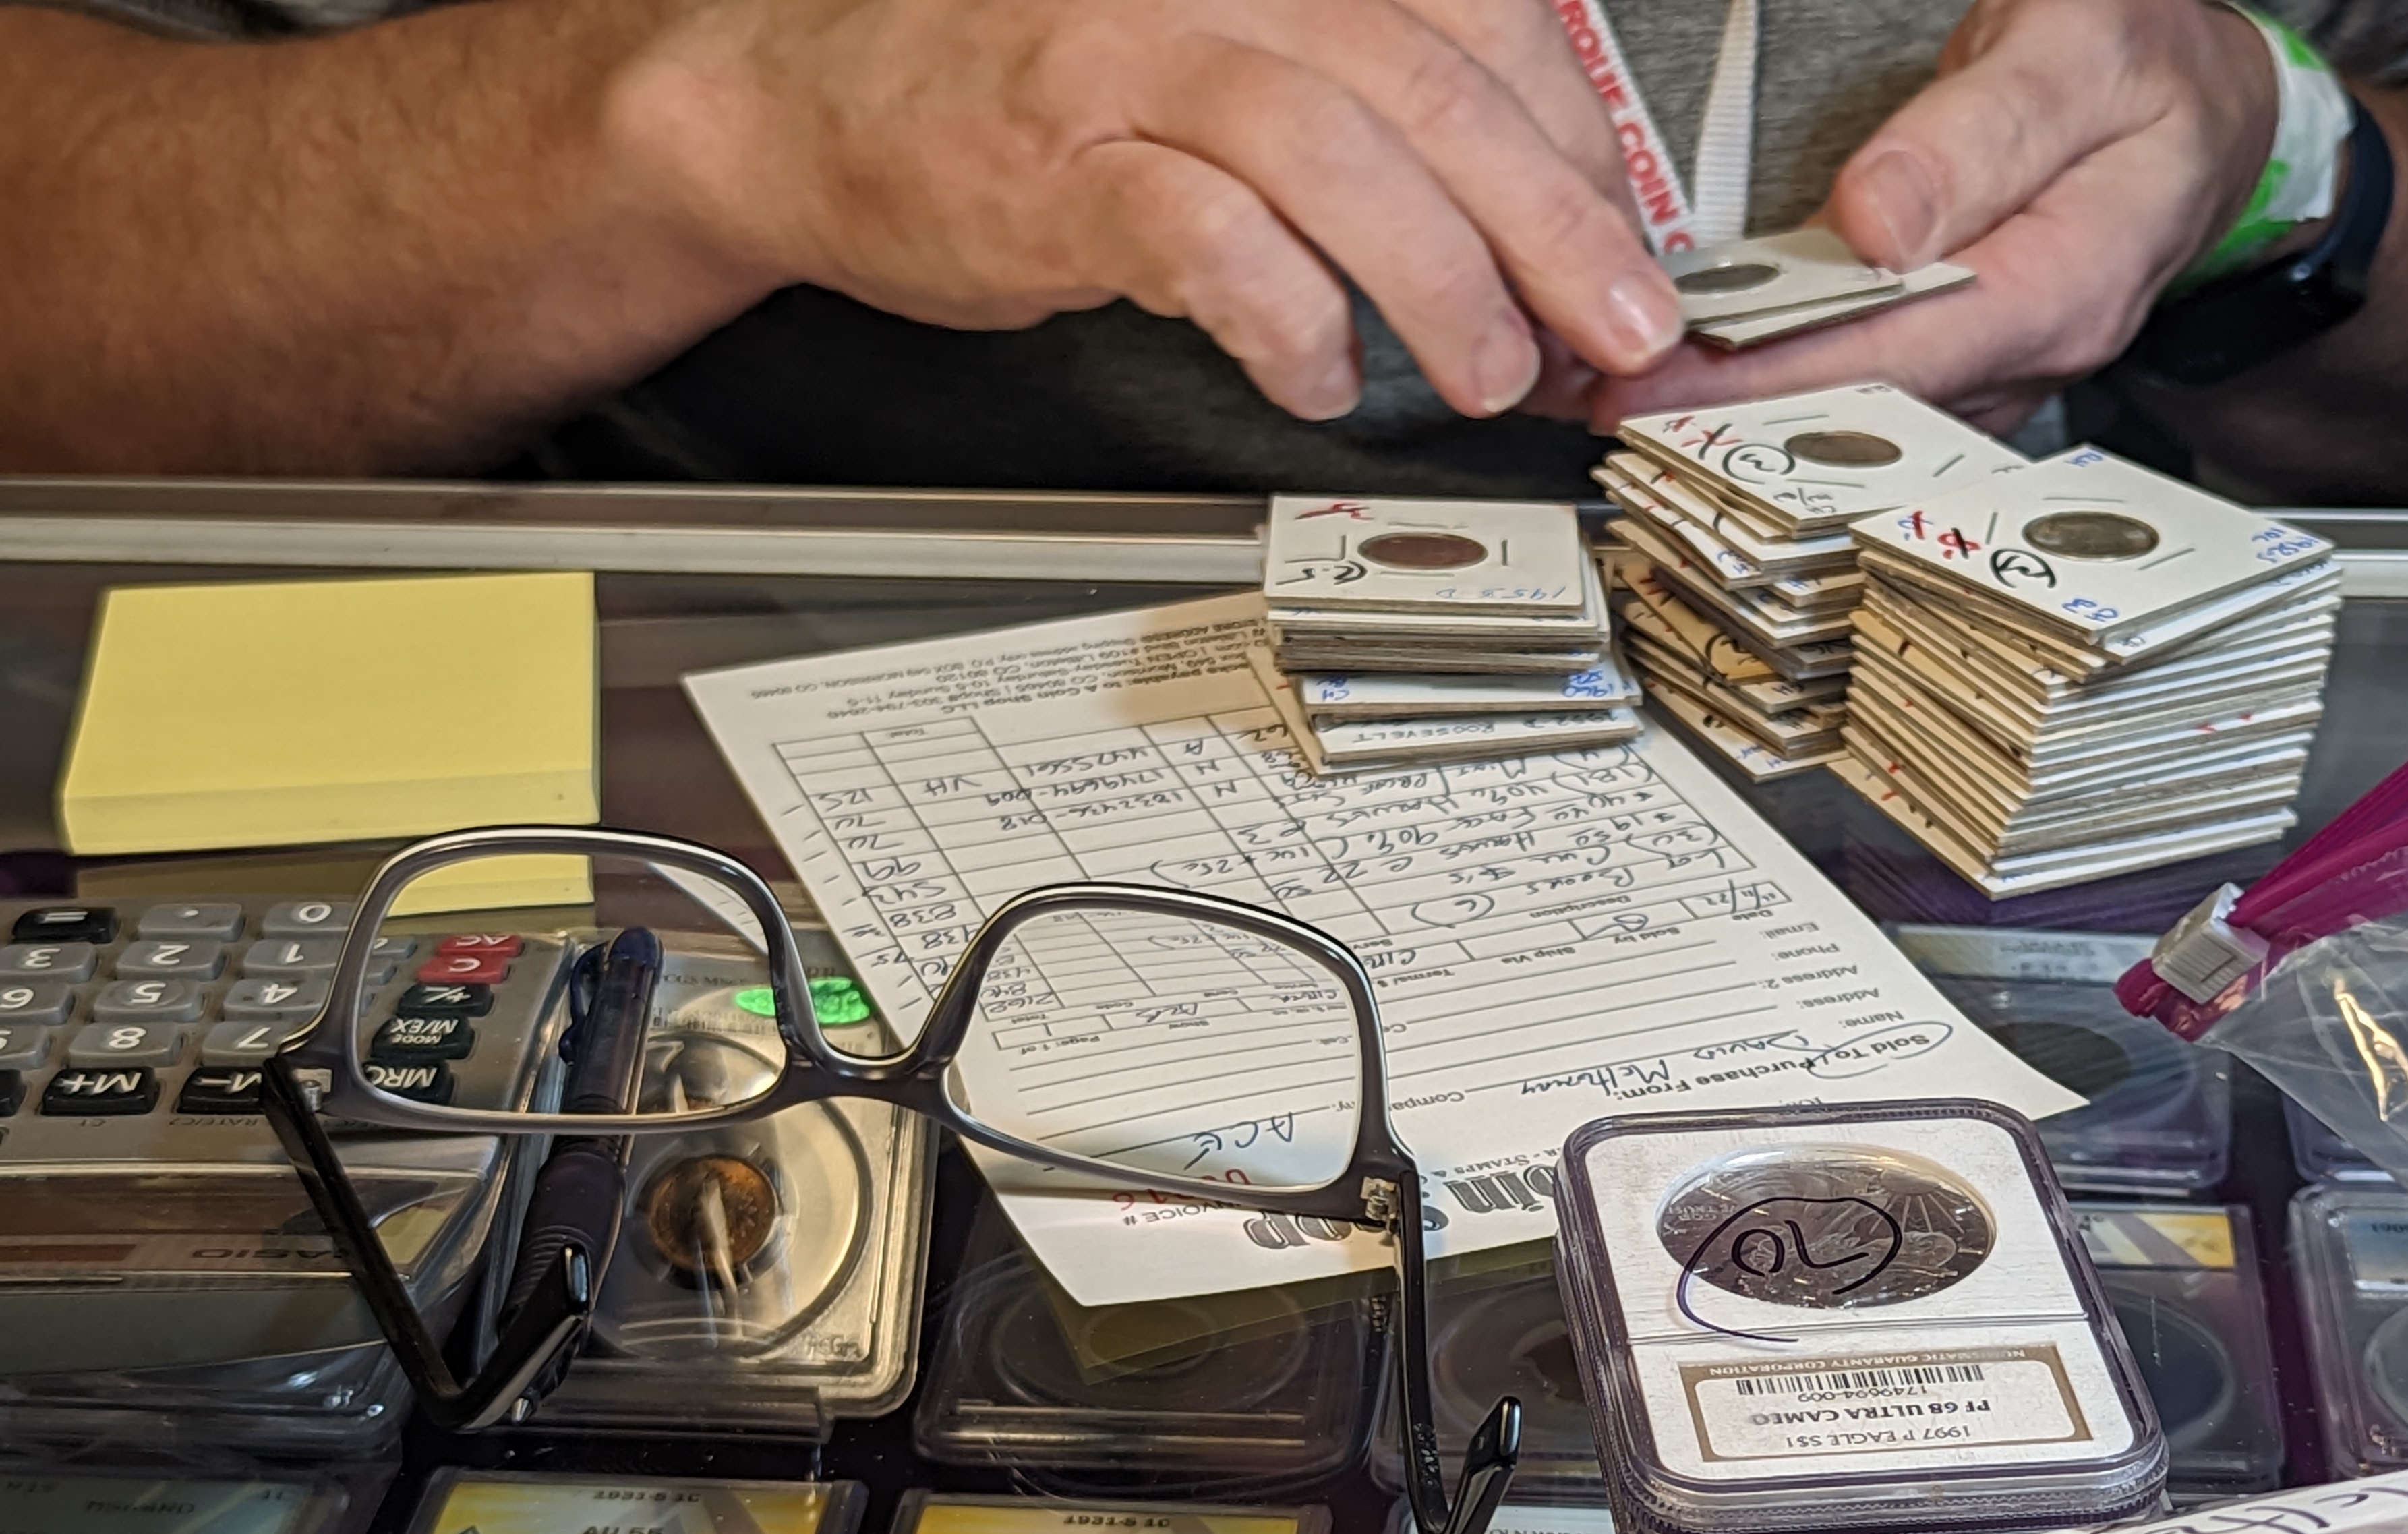 A dealer takes inventory of his wares; closeup of his hands and table